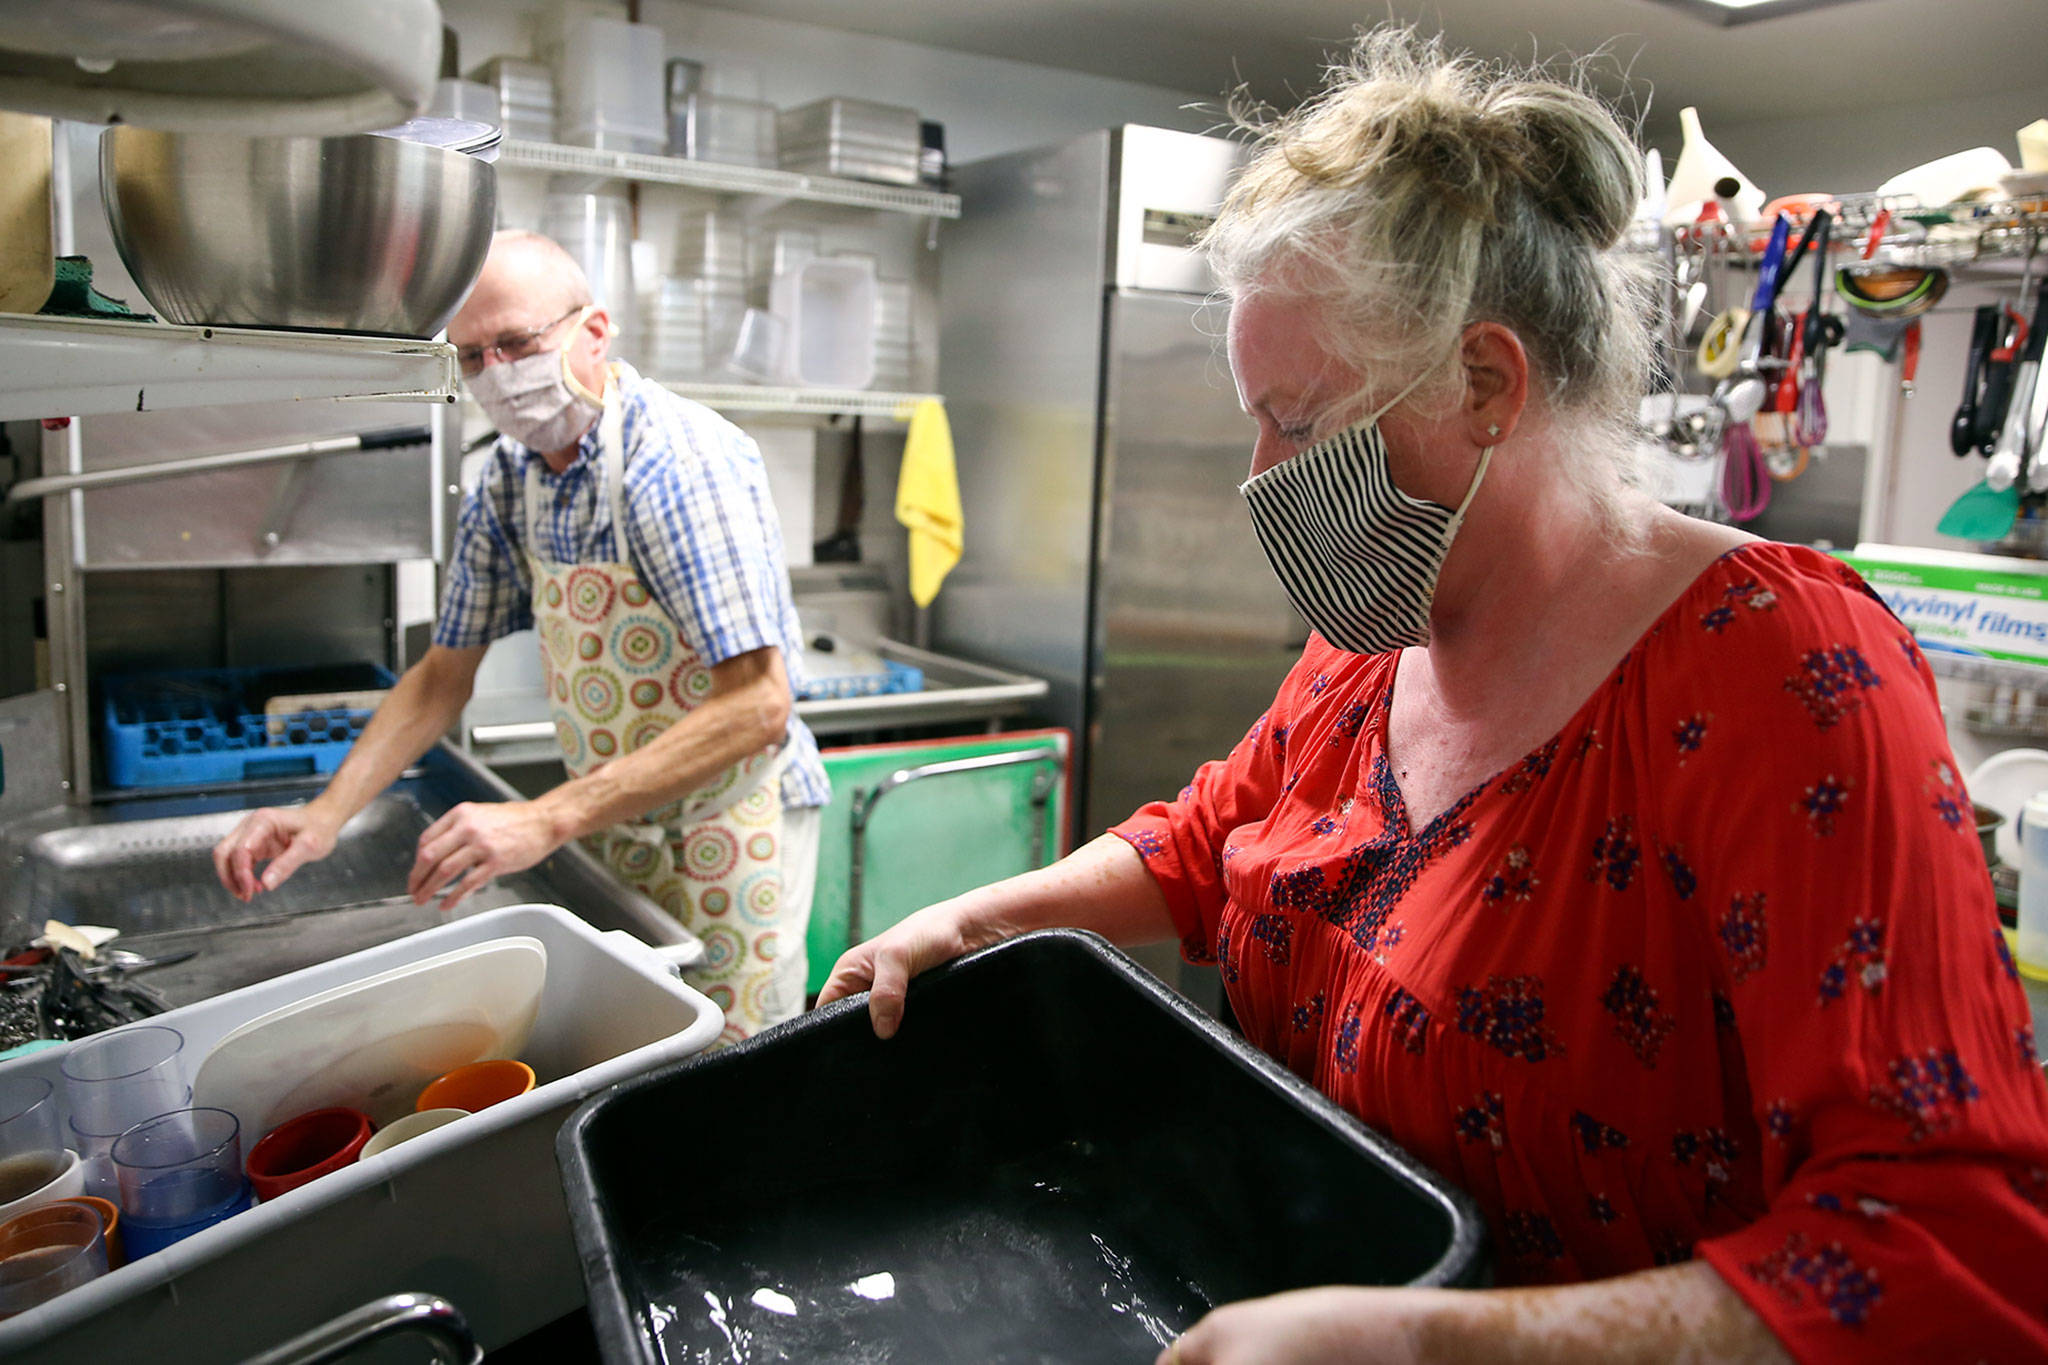 Brian Tilley (left) and Katie Dearman work the wash station Friday at Kate’s Greek American Deli in Everett. (Kevin Clark / The Herald)